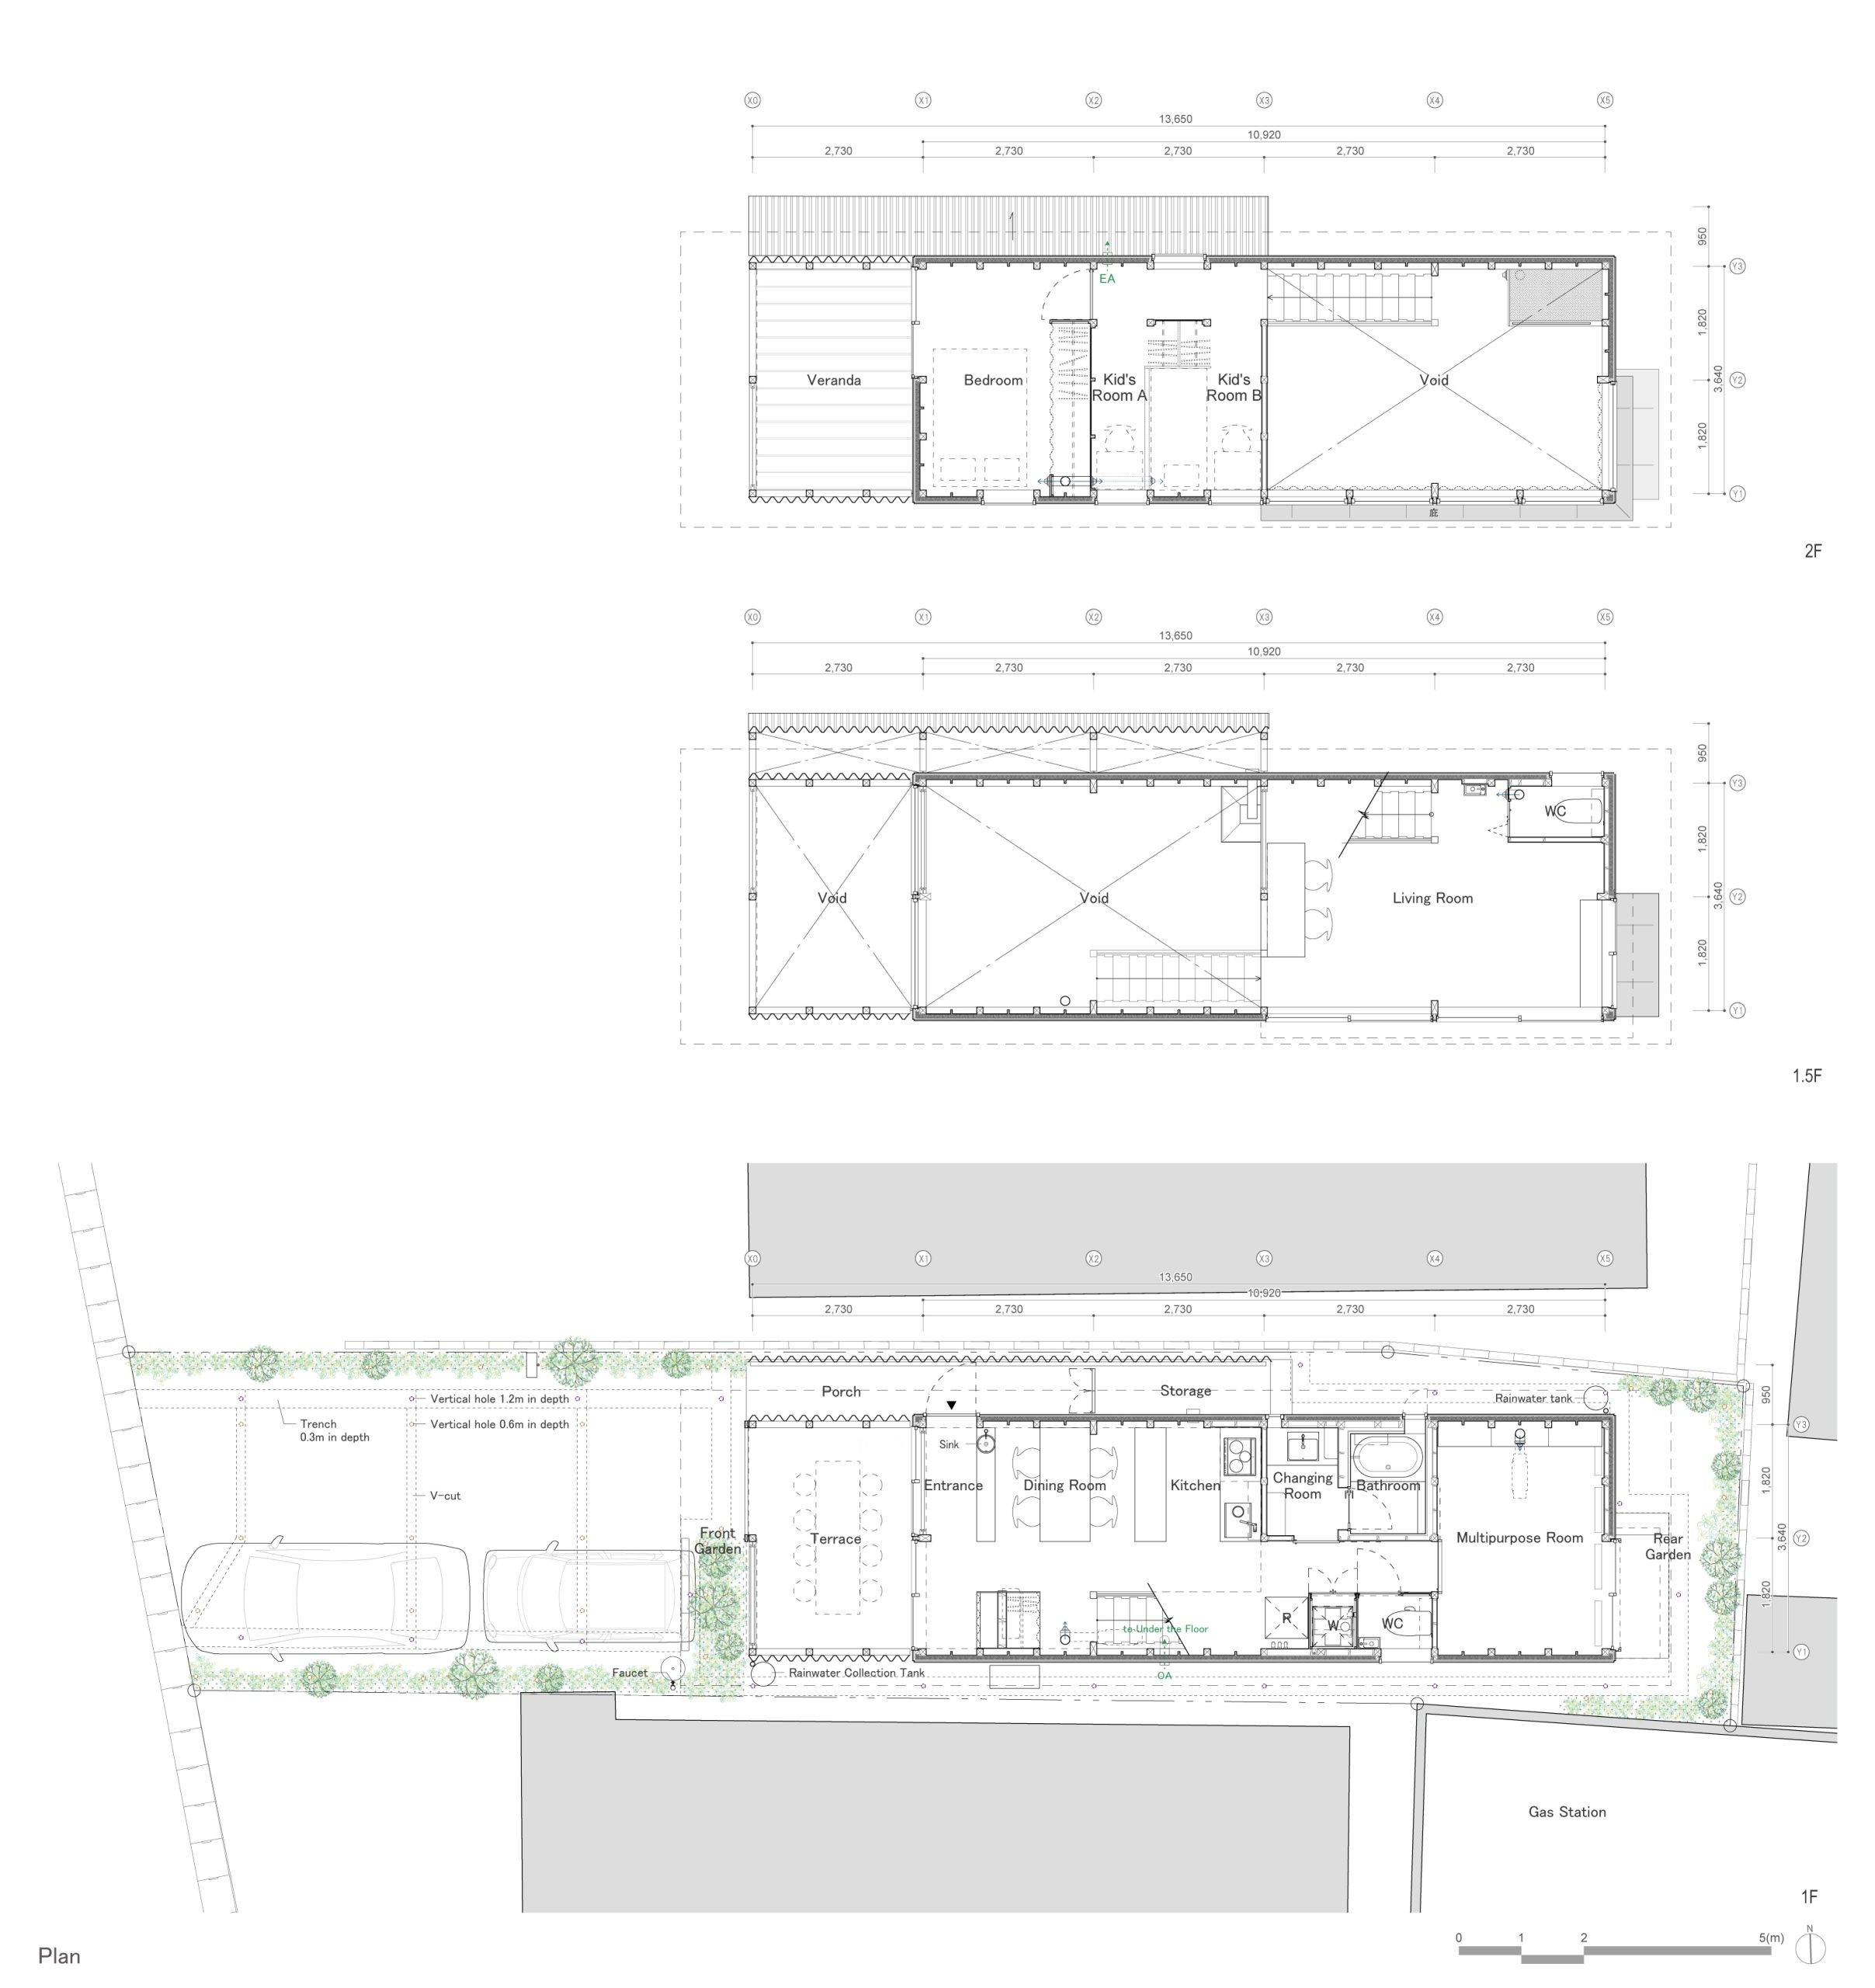 Plan drawing of Minimum House in Toyota